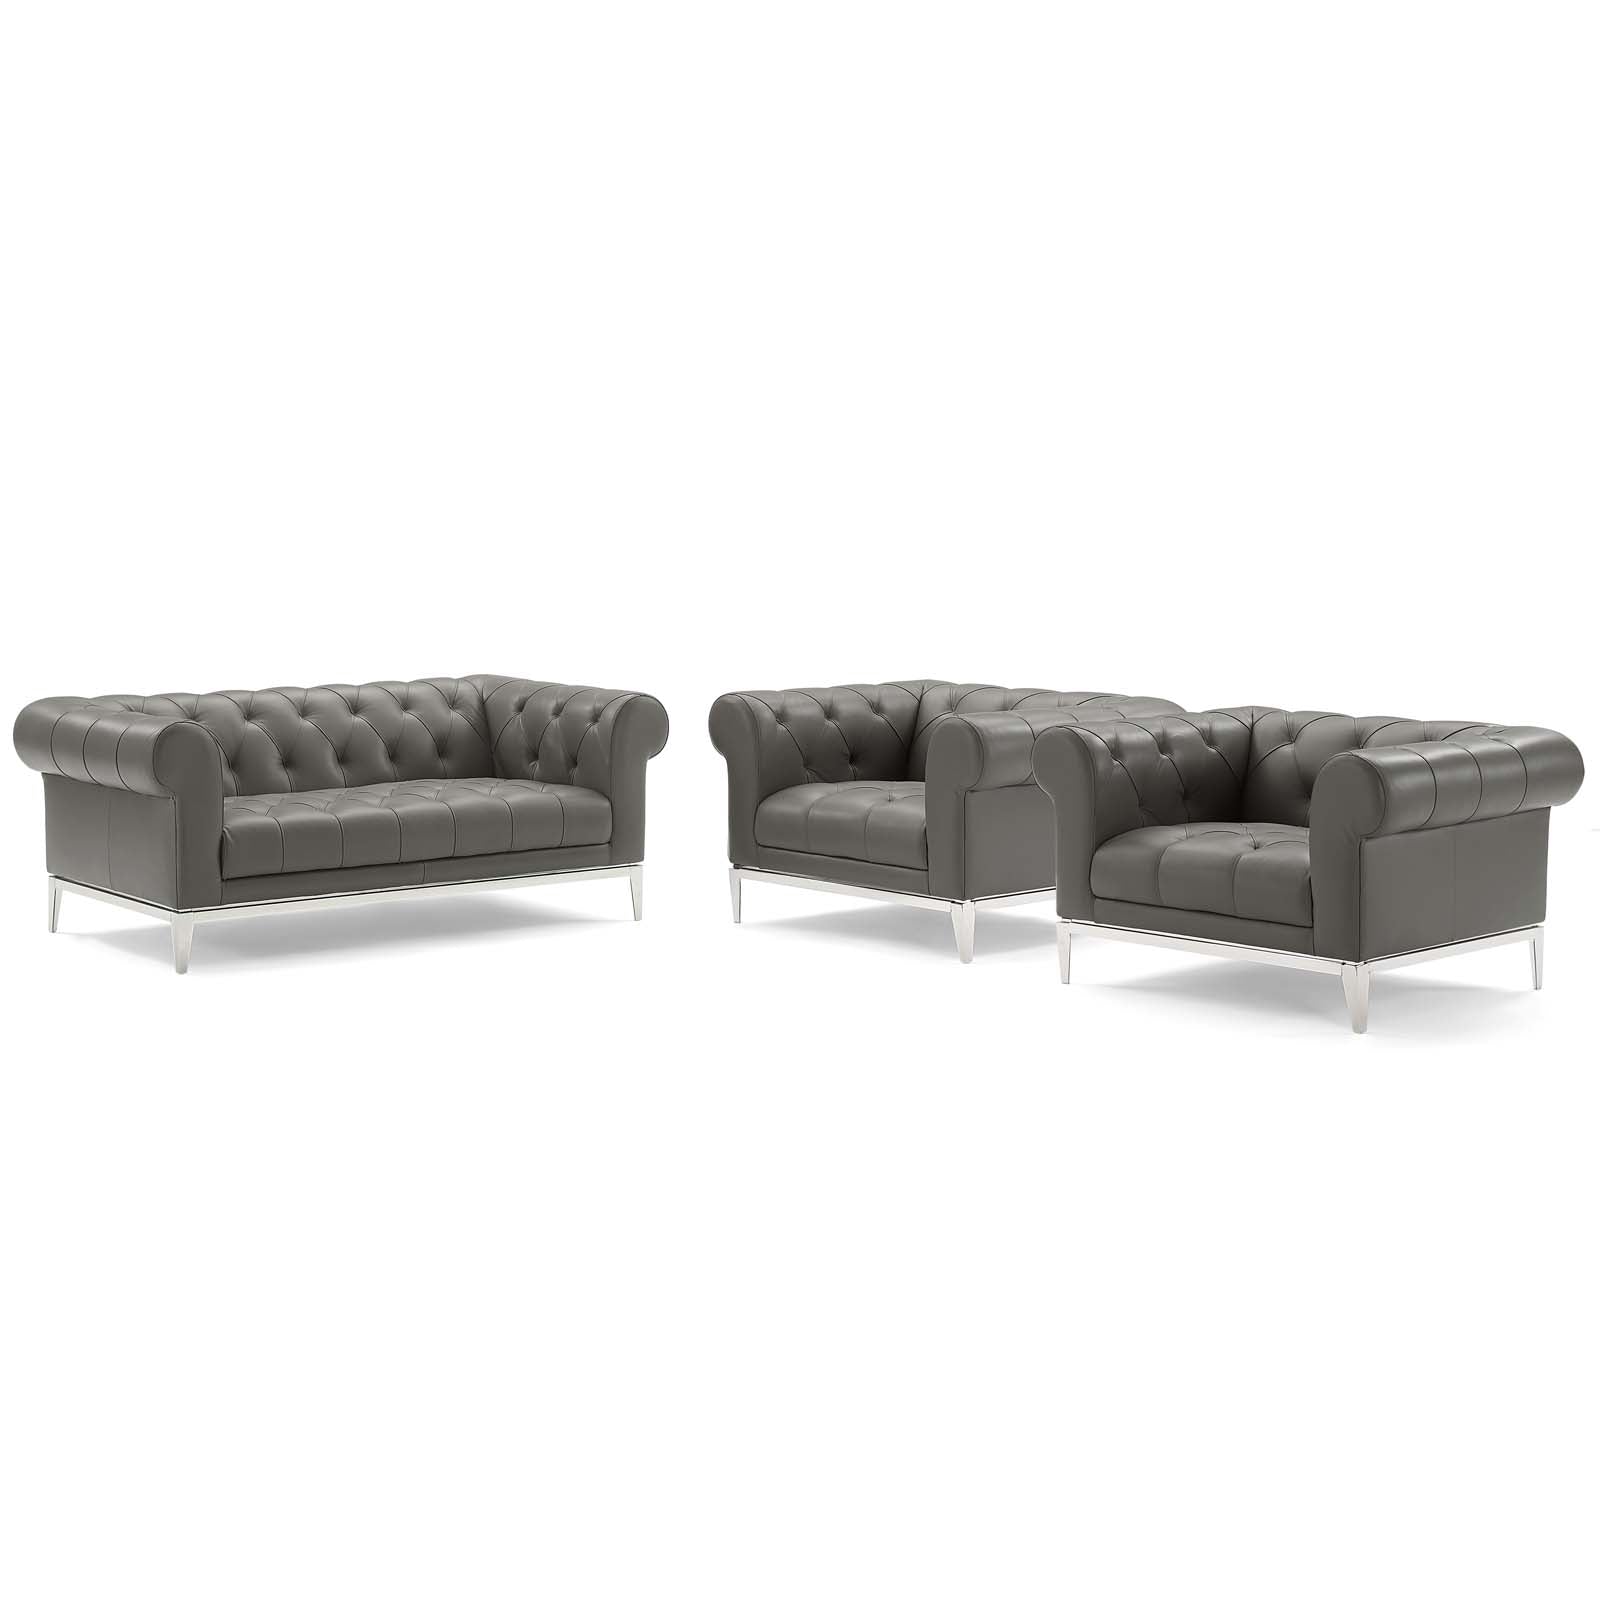 Modway Living Room Sets - Idyll-Tufted-Upholstered-Leather-3-Piece-Set-Gray